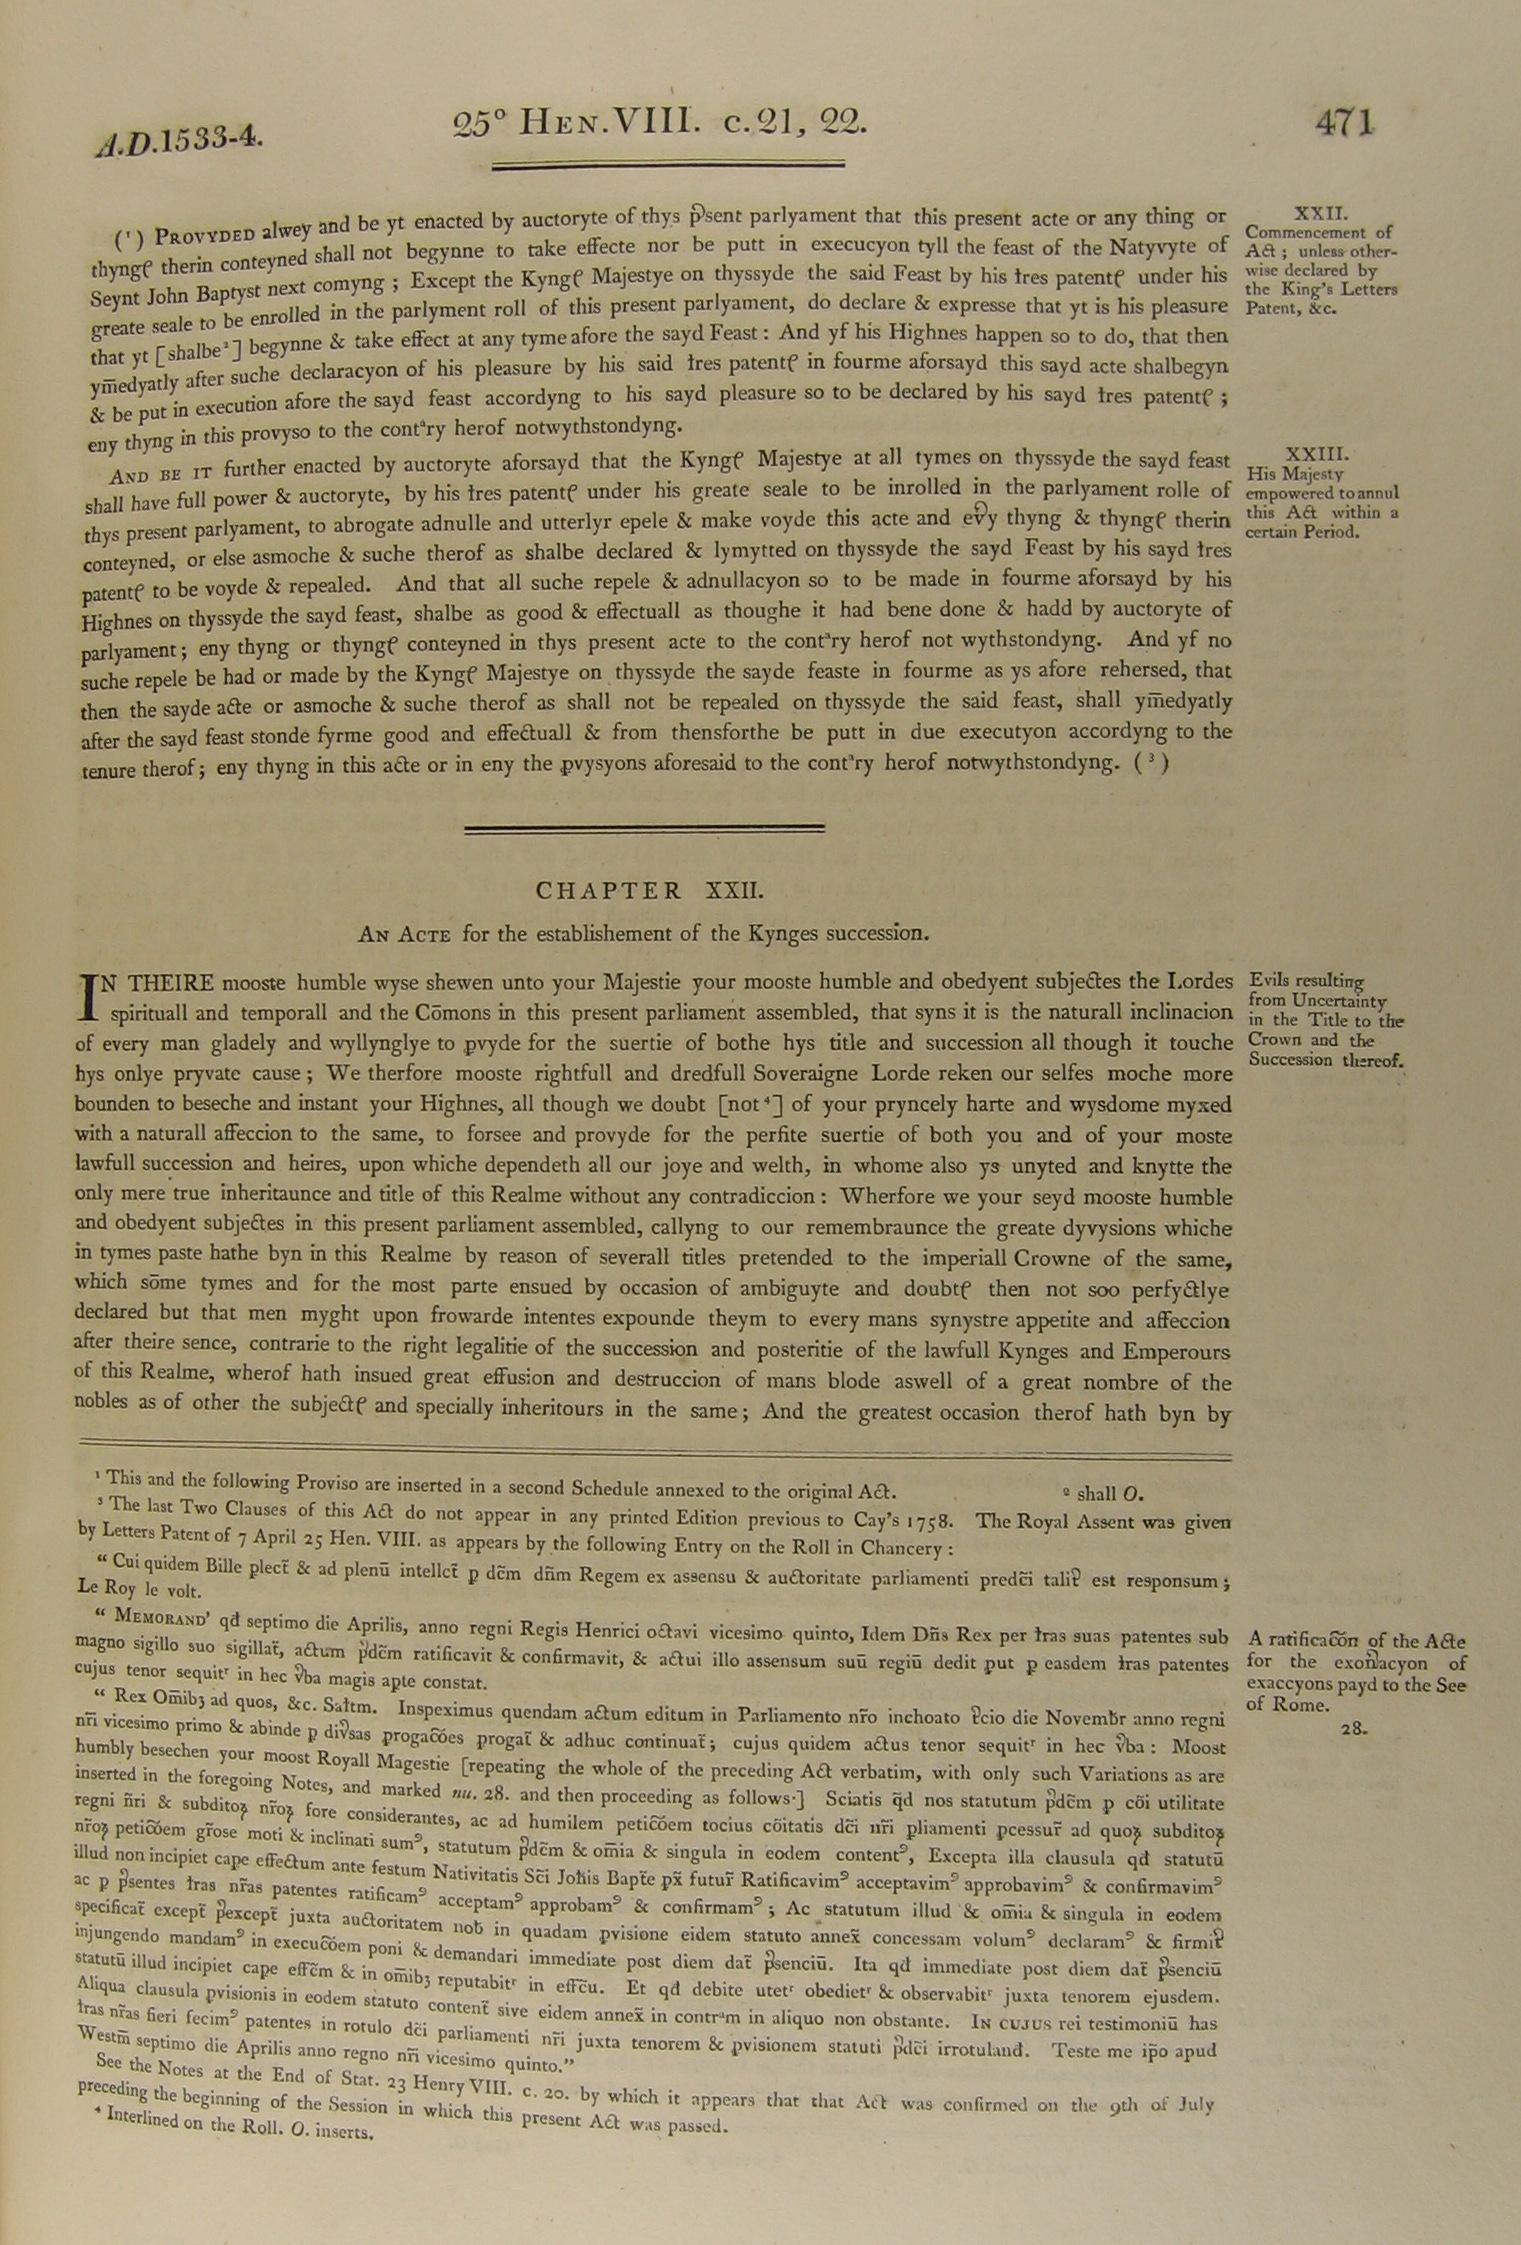 Image of 25 Henry VIII, c. 21 (page 8 of 8). Click for larger image.